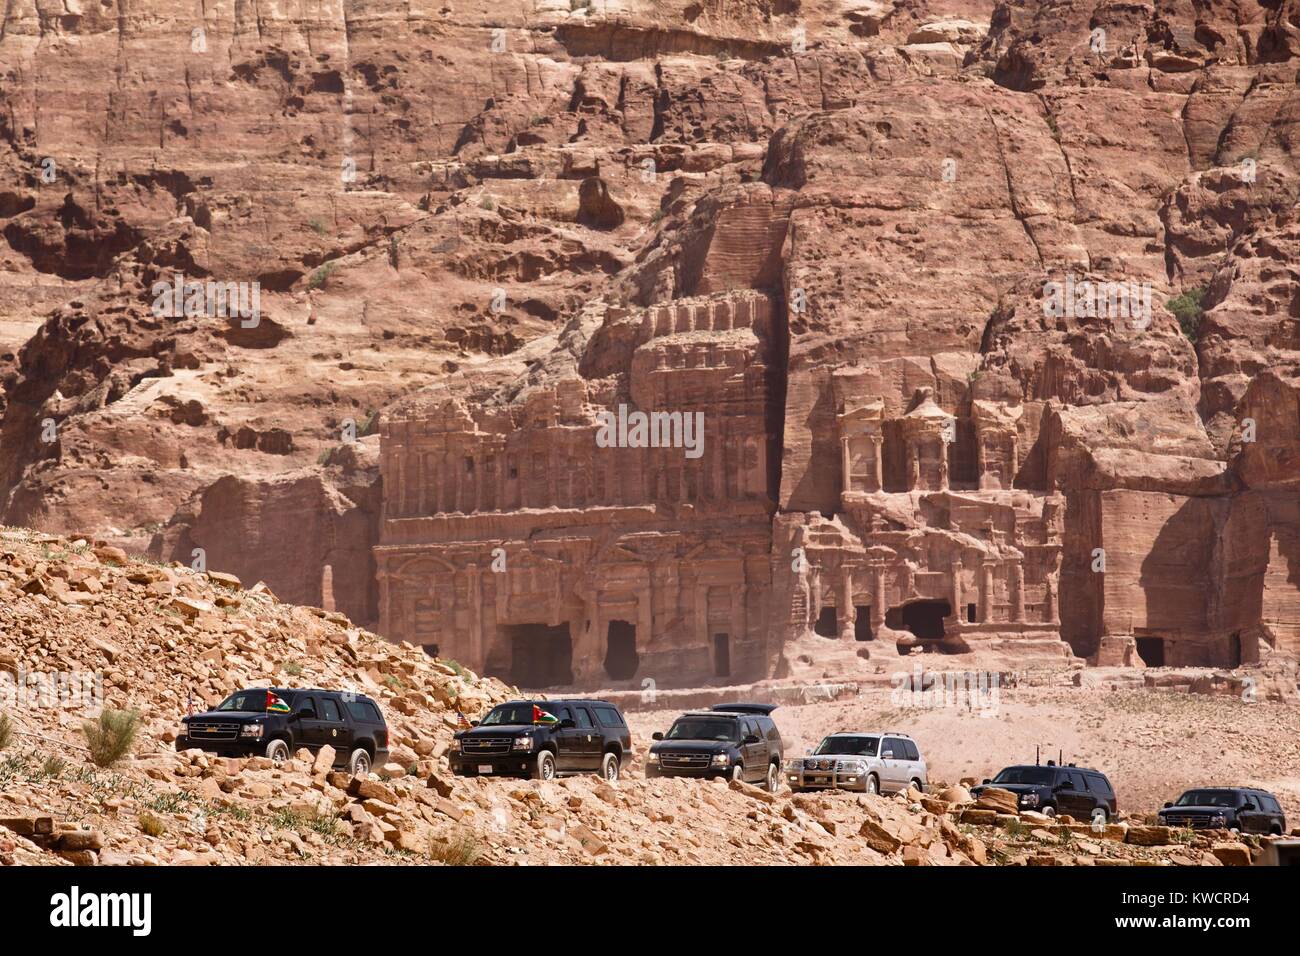 President Barack Obama's motorcade at the ancient city of Petra in Jordan. March 23, 2013. Established possibly in the 3rd C. B.C., it is Jordan's most-visited tourist attraction. (BSLOC 2015 3 184) Stock Photo